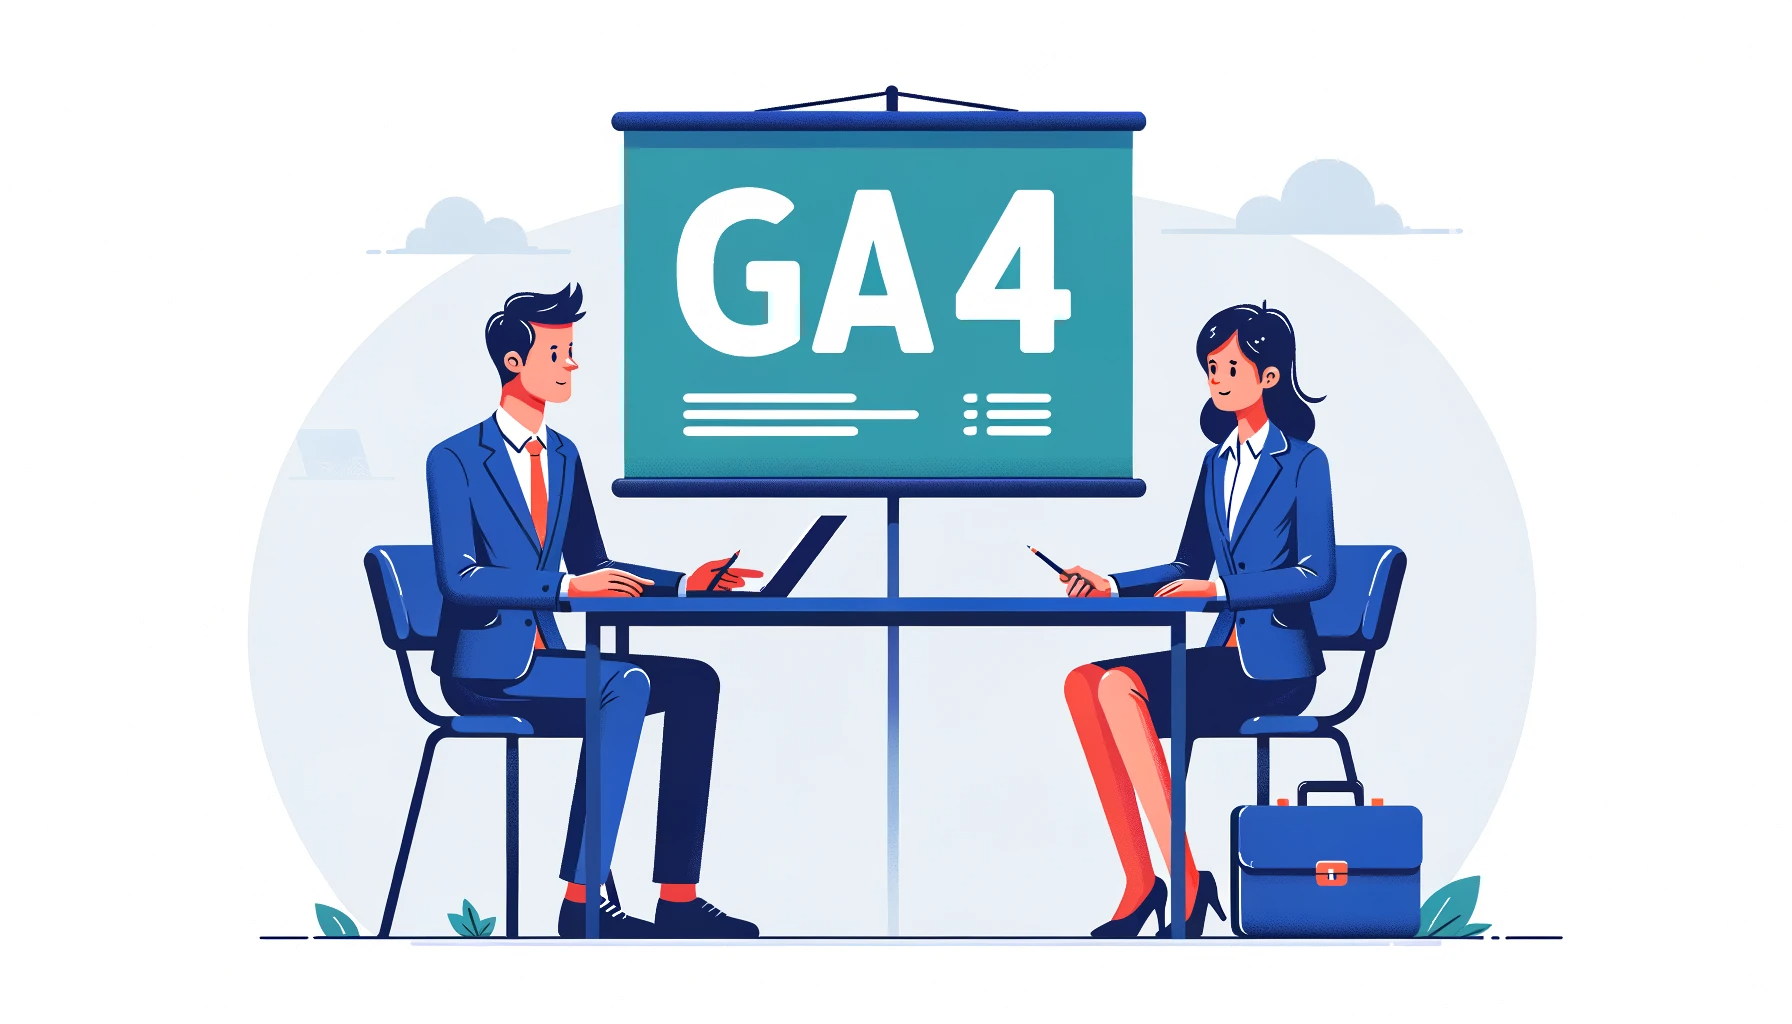 How To Find 404 Errors in GA4